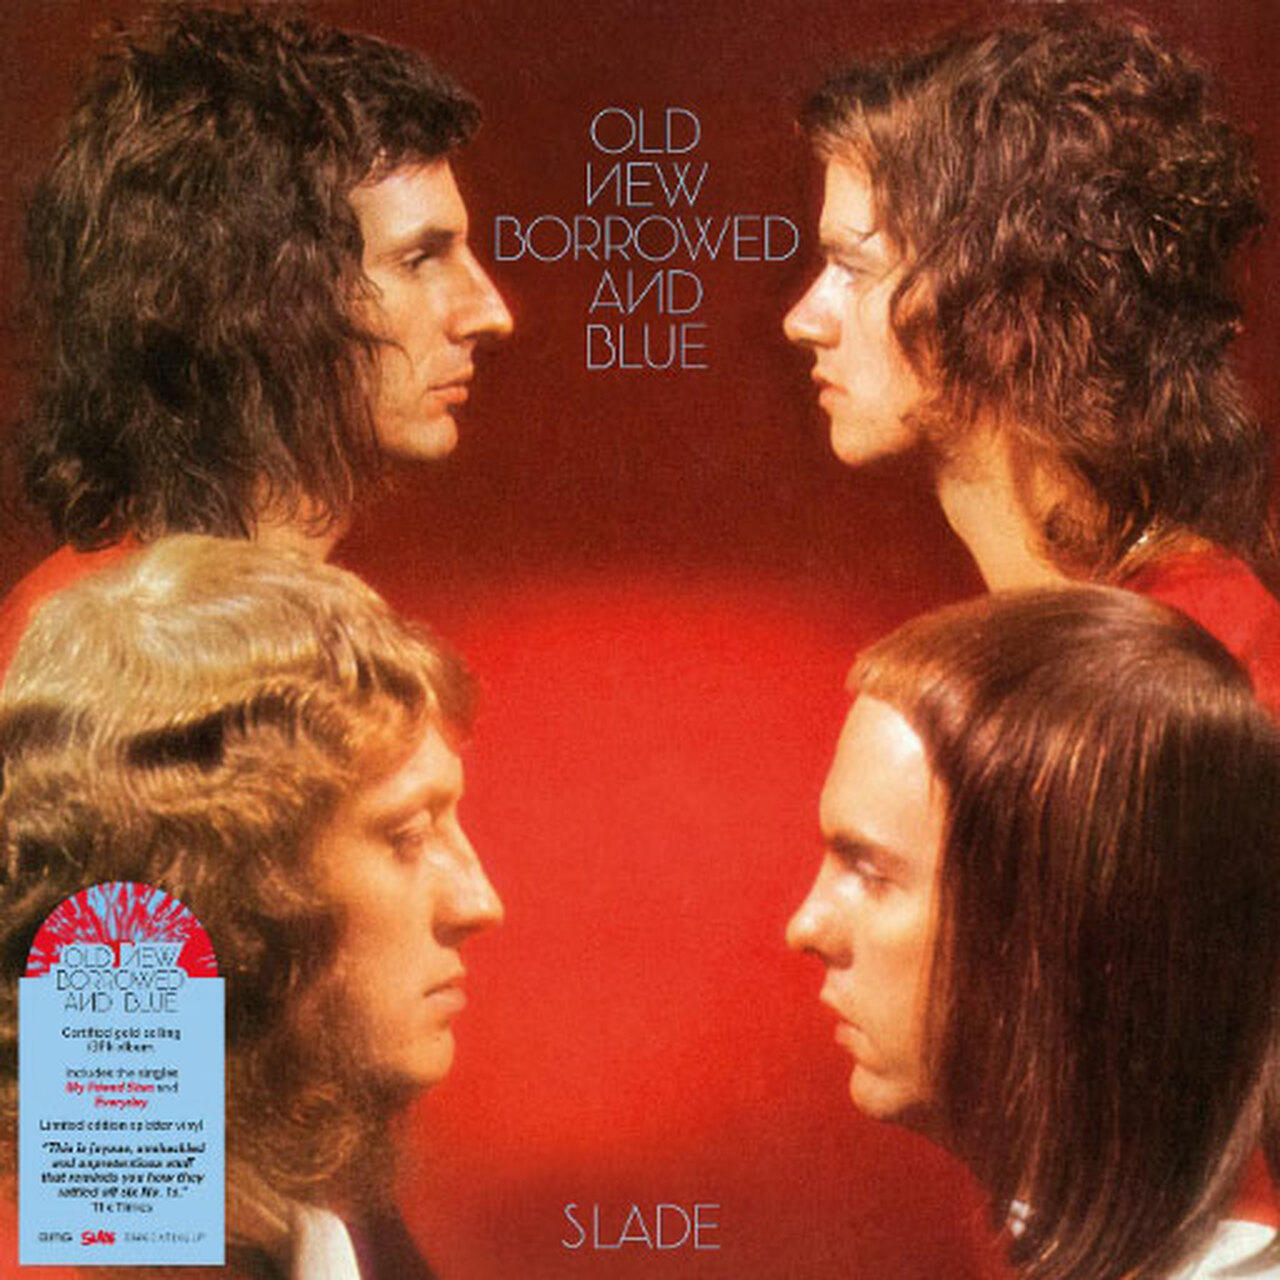 Slade - Old Blue - Borrowed New (Vinyl) and